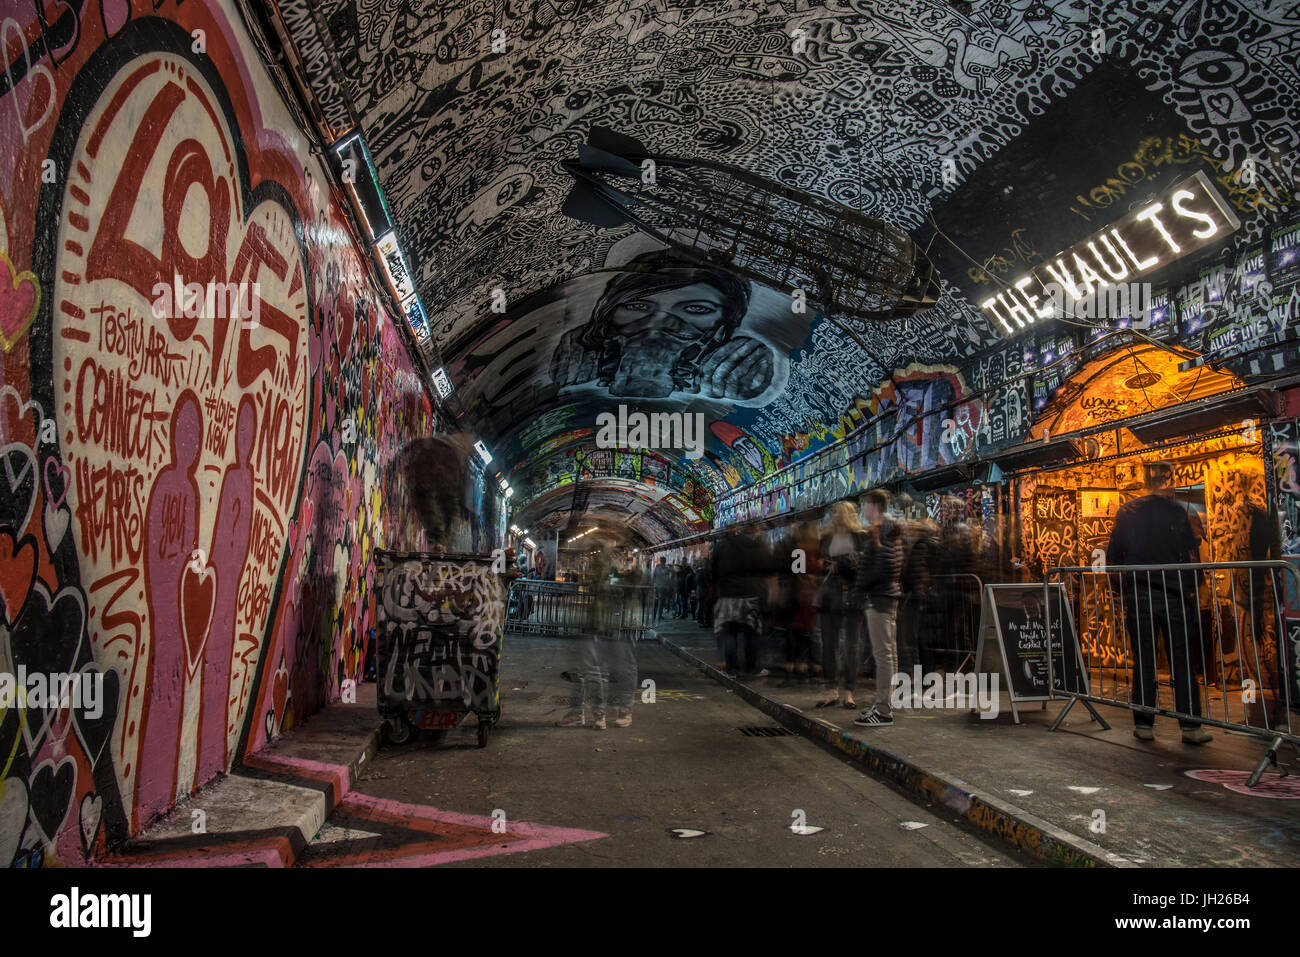 Graffiti Artists and people awaiting a show at The Vaults in the Leake Street Tunnel in London, England, United Kingdom, Europe Stock Photo